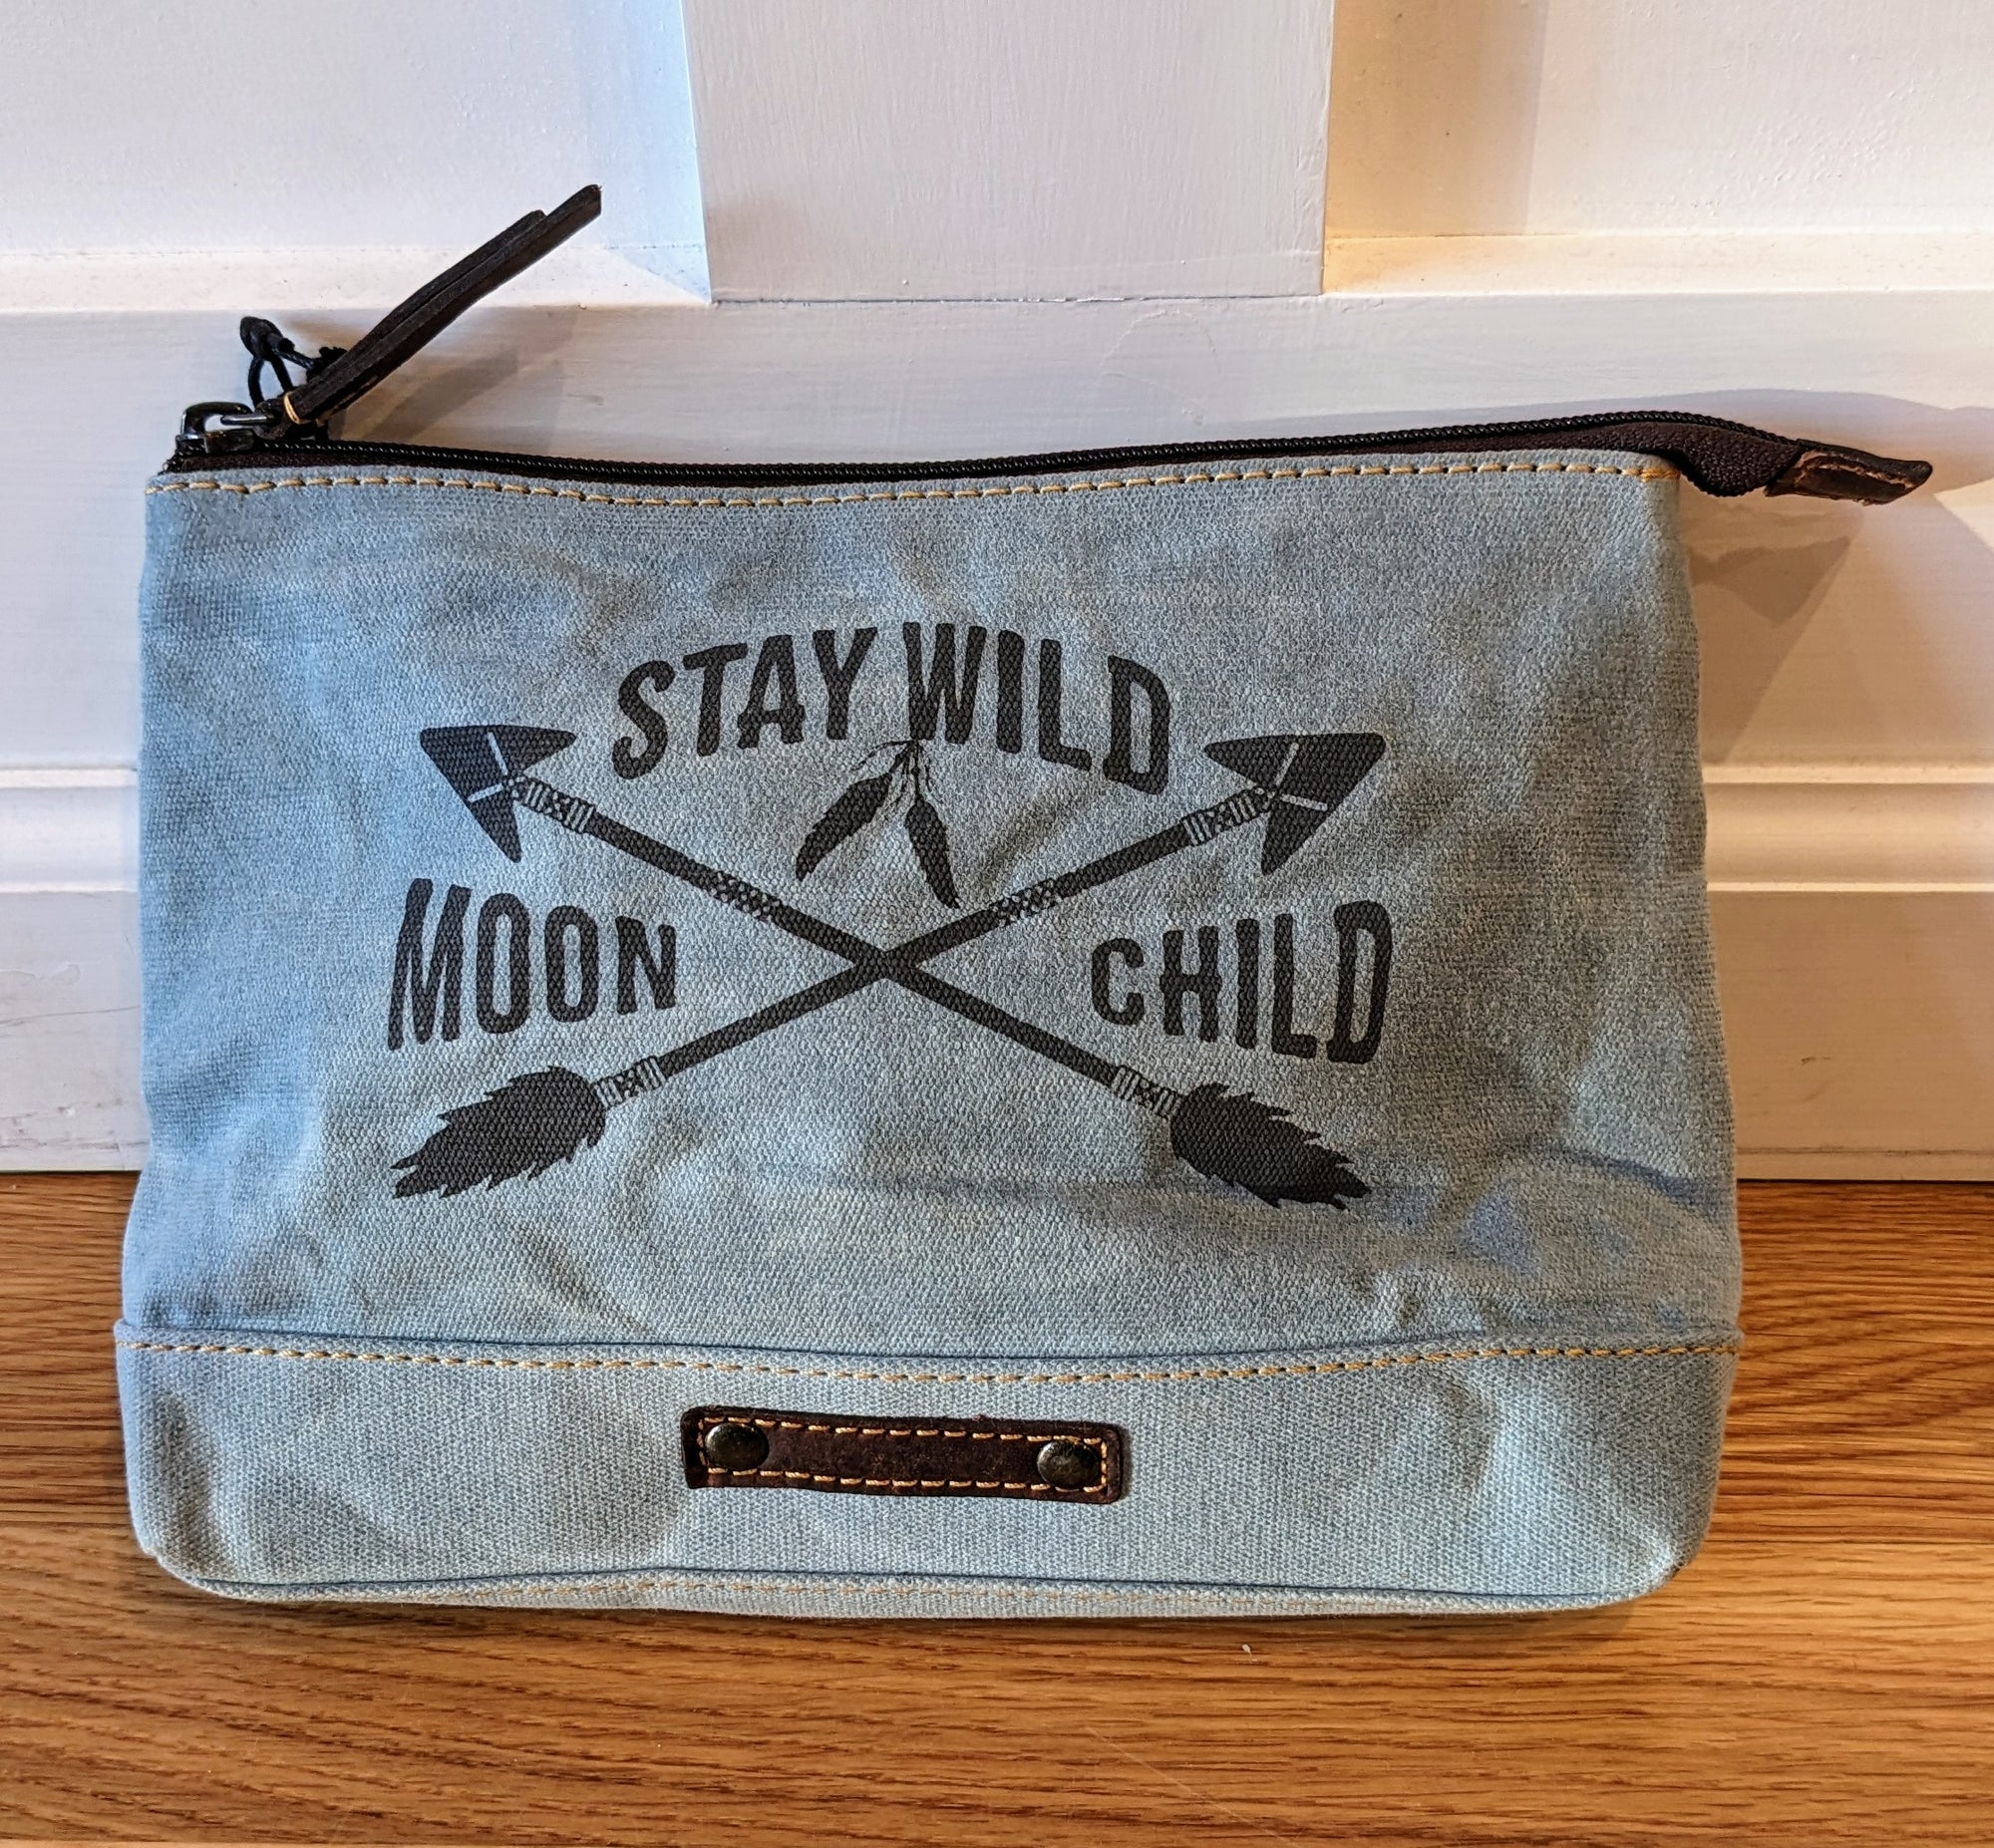 Stay Wild Moon Child Pouch